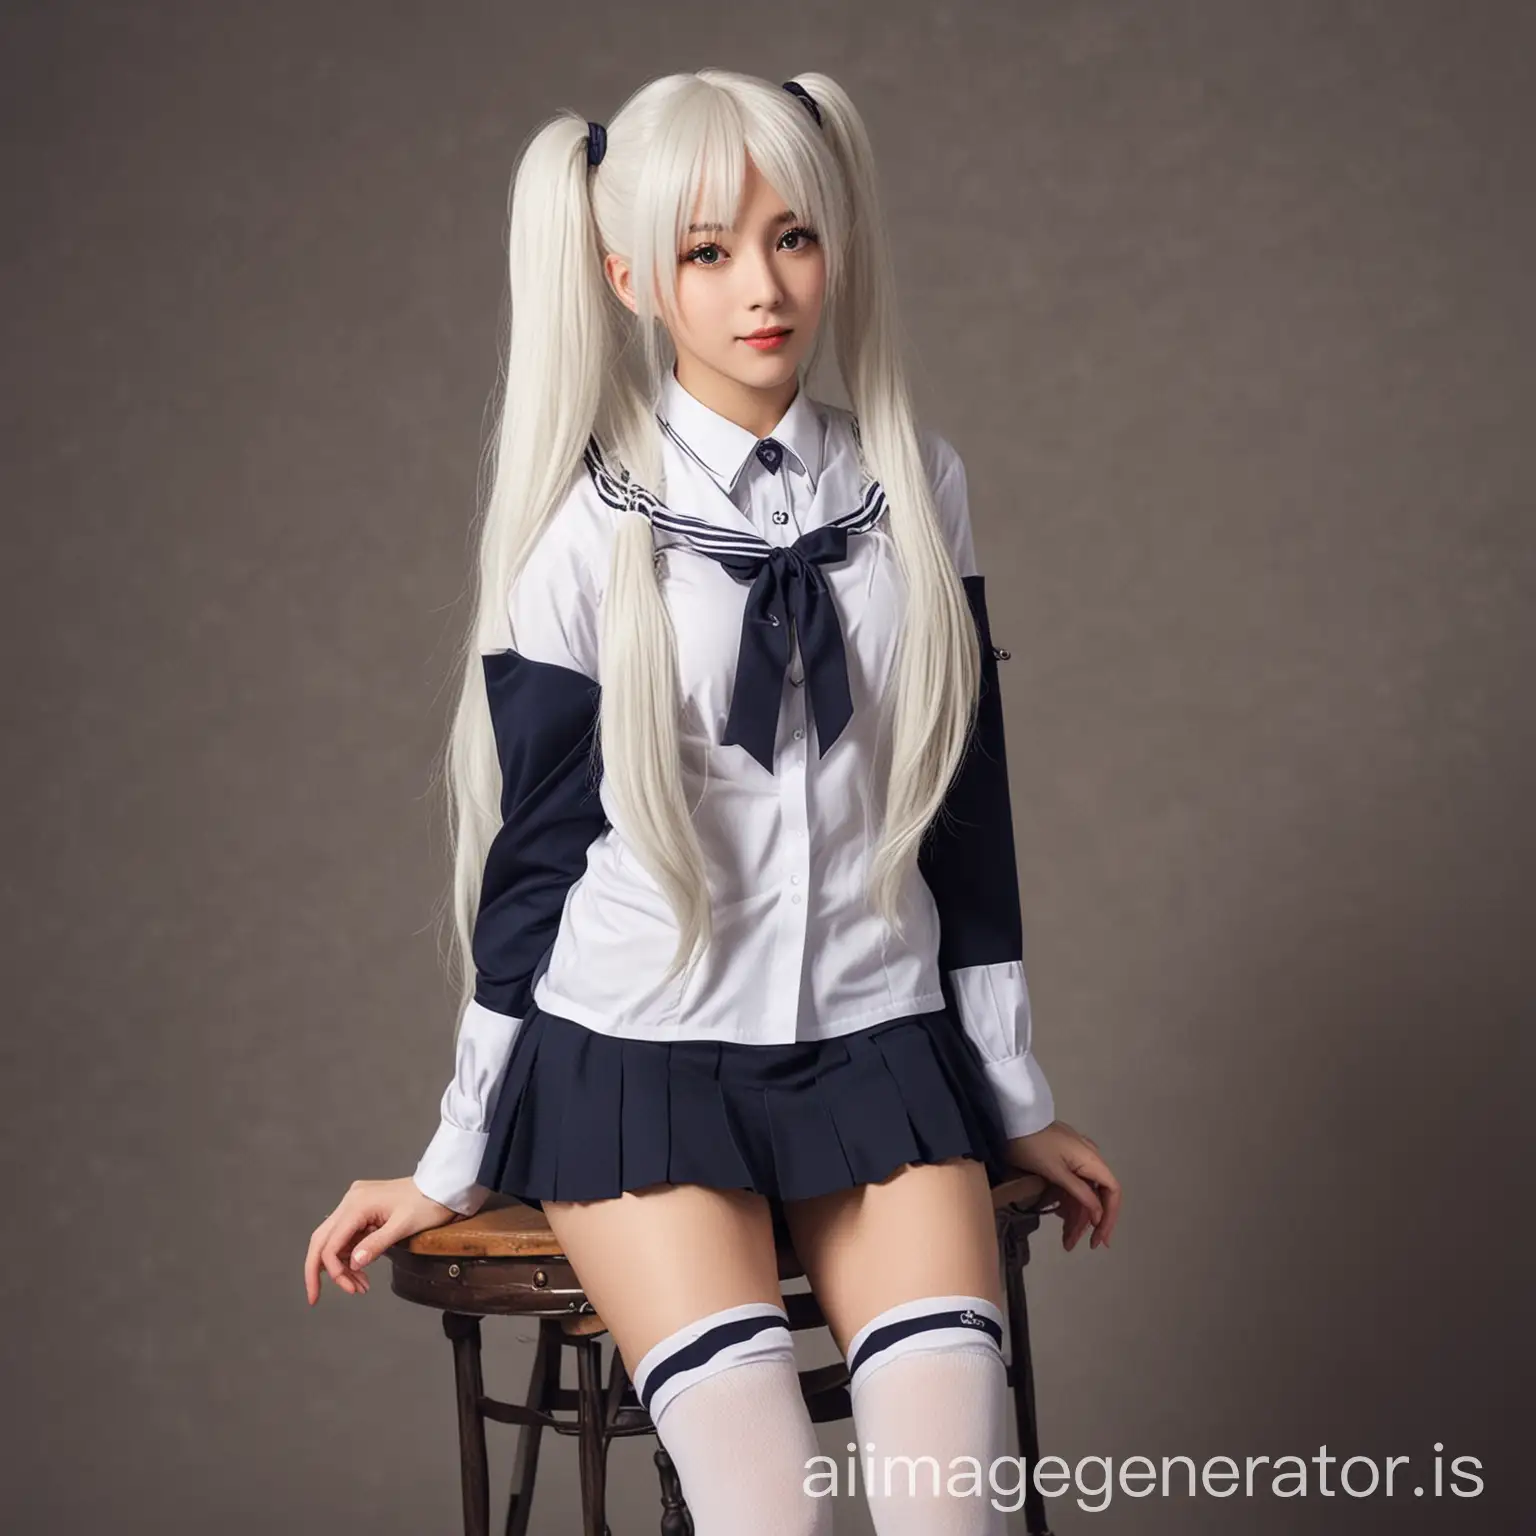 Long long white hair in twin tails, exquisite, JK uniform, over the knee socks, long legs, beautiful